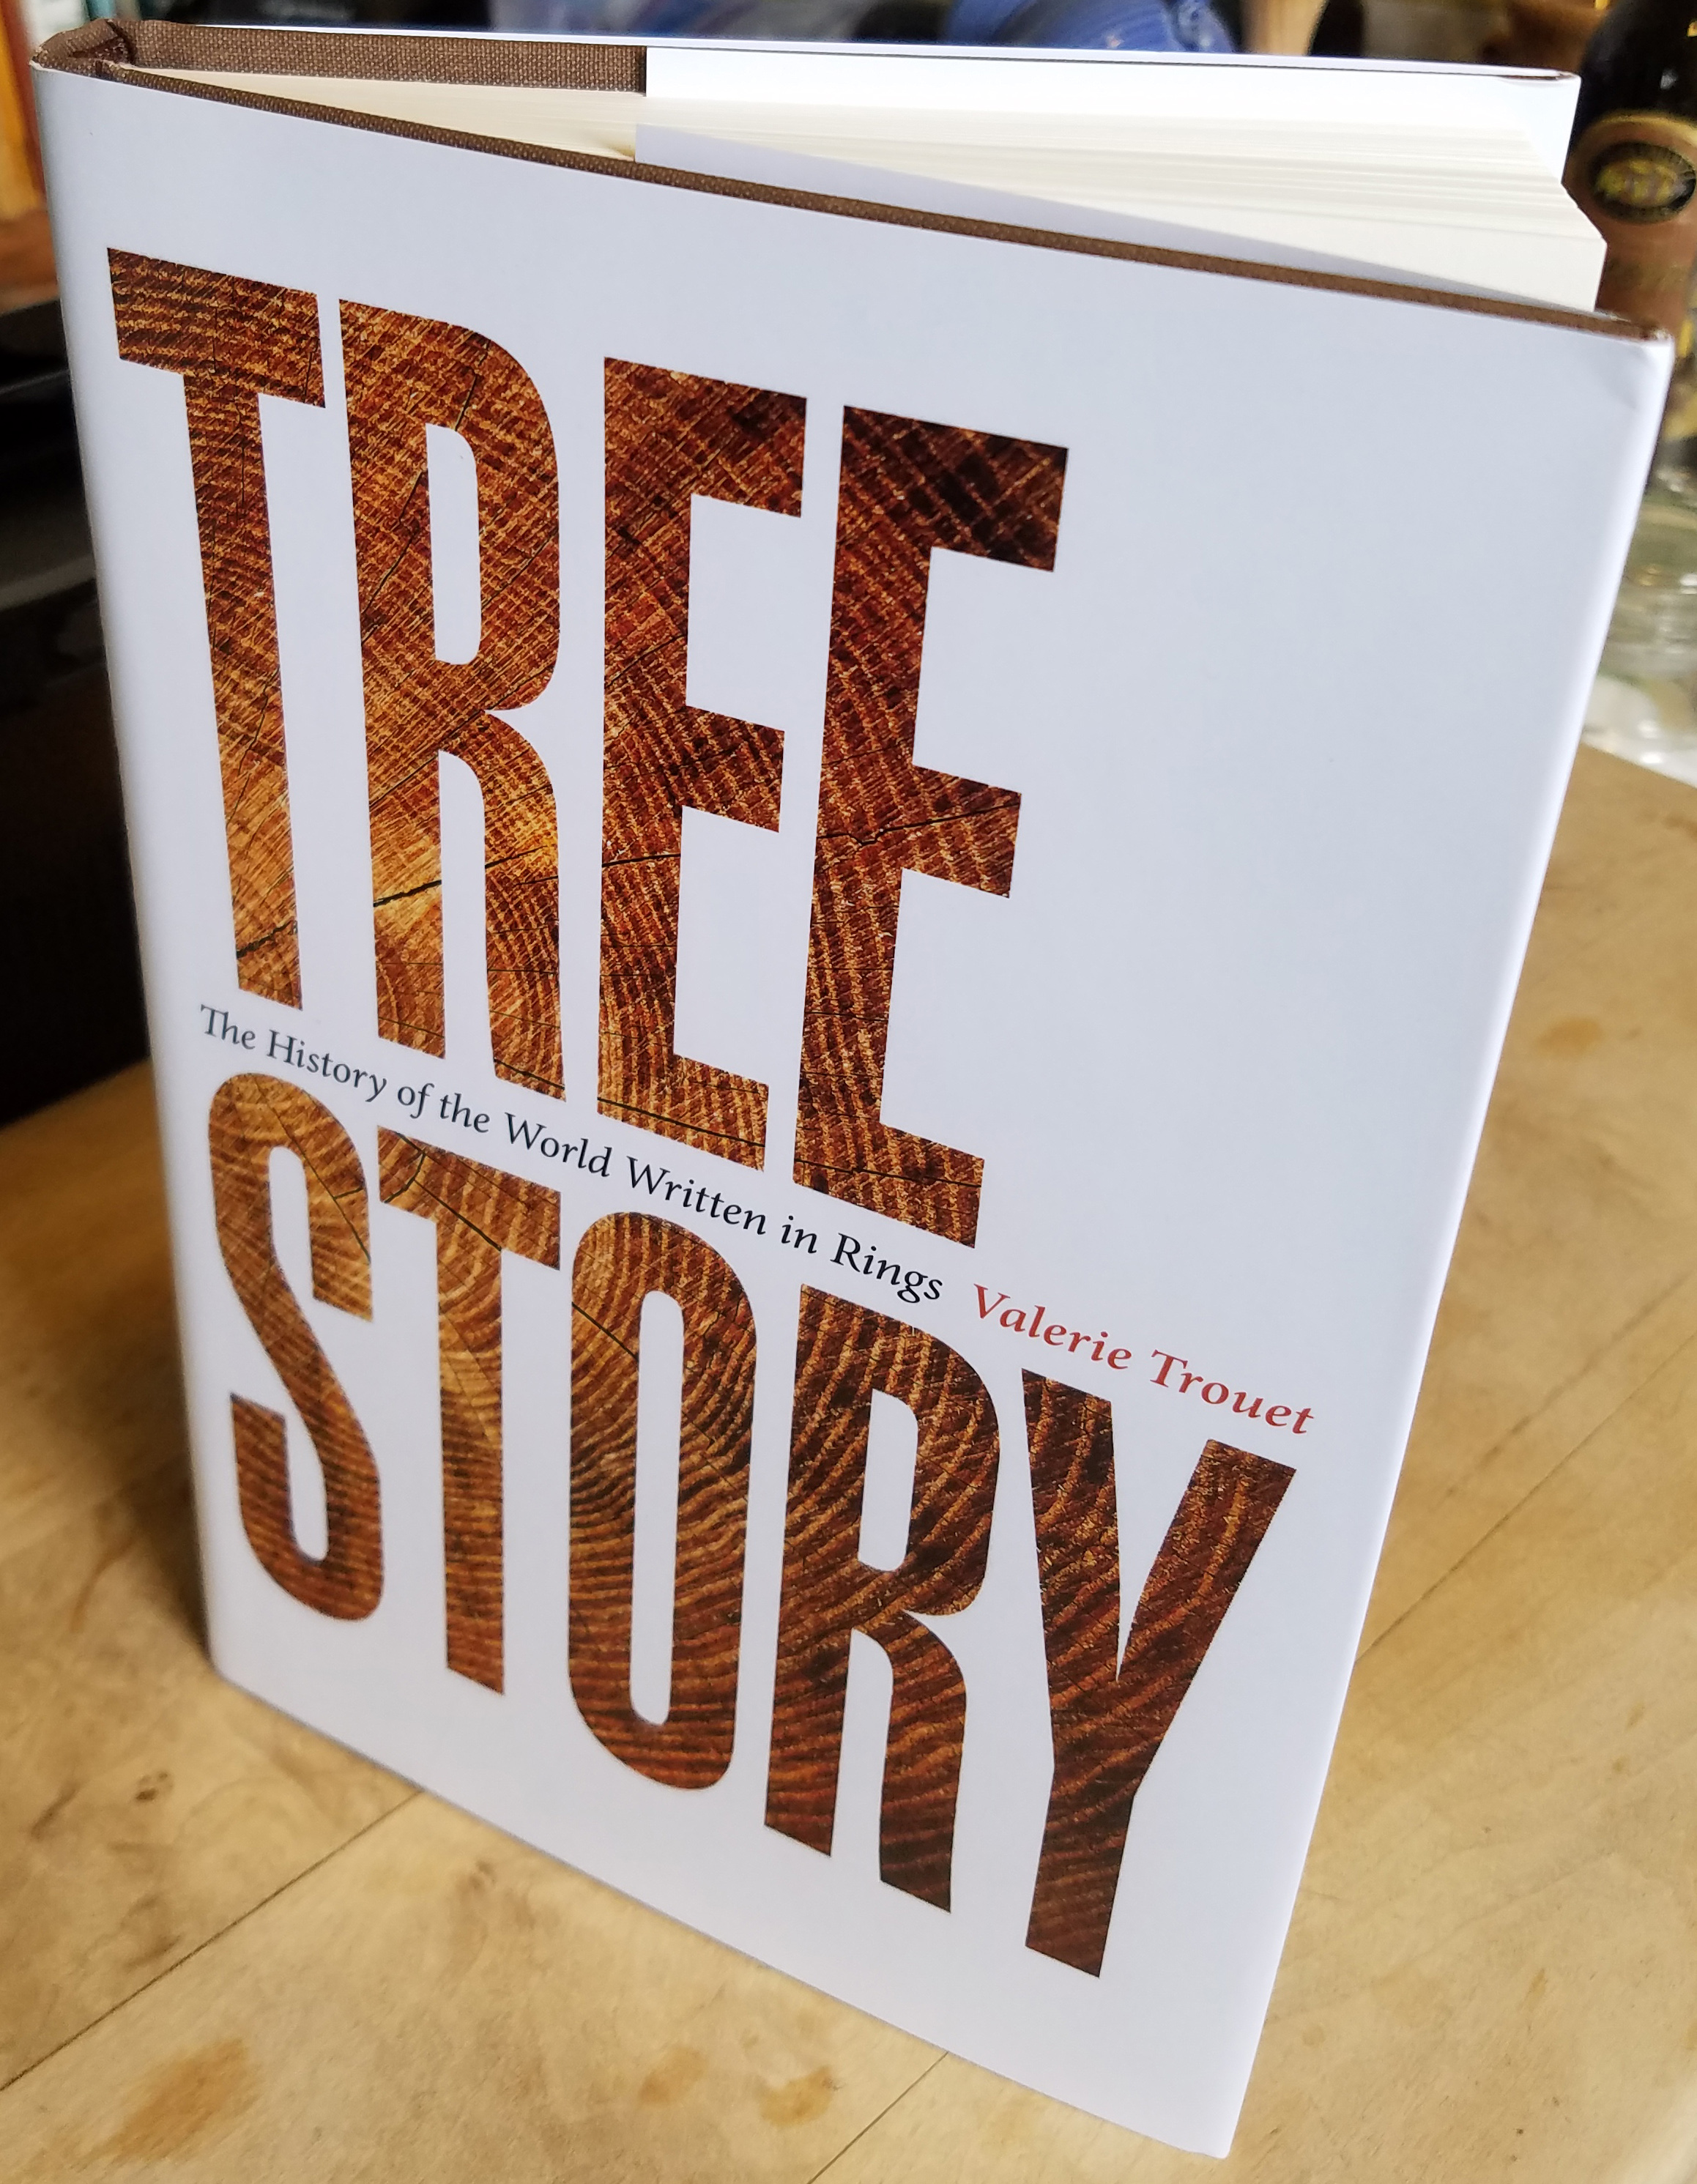 the first tree story download free